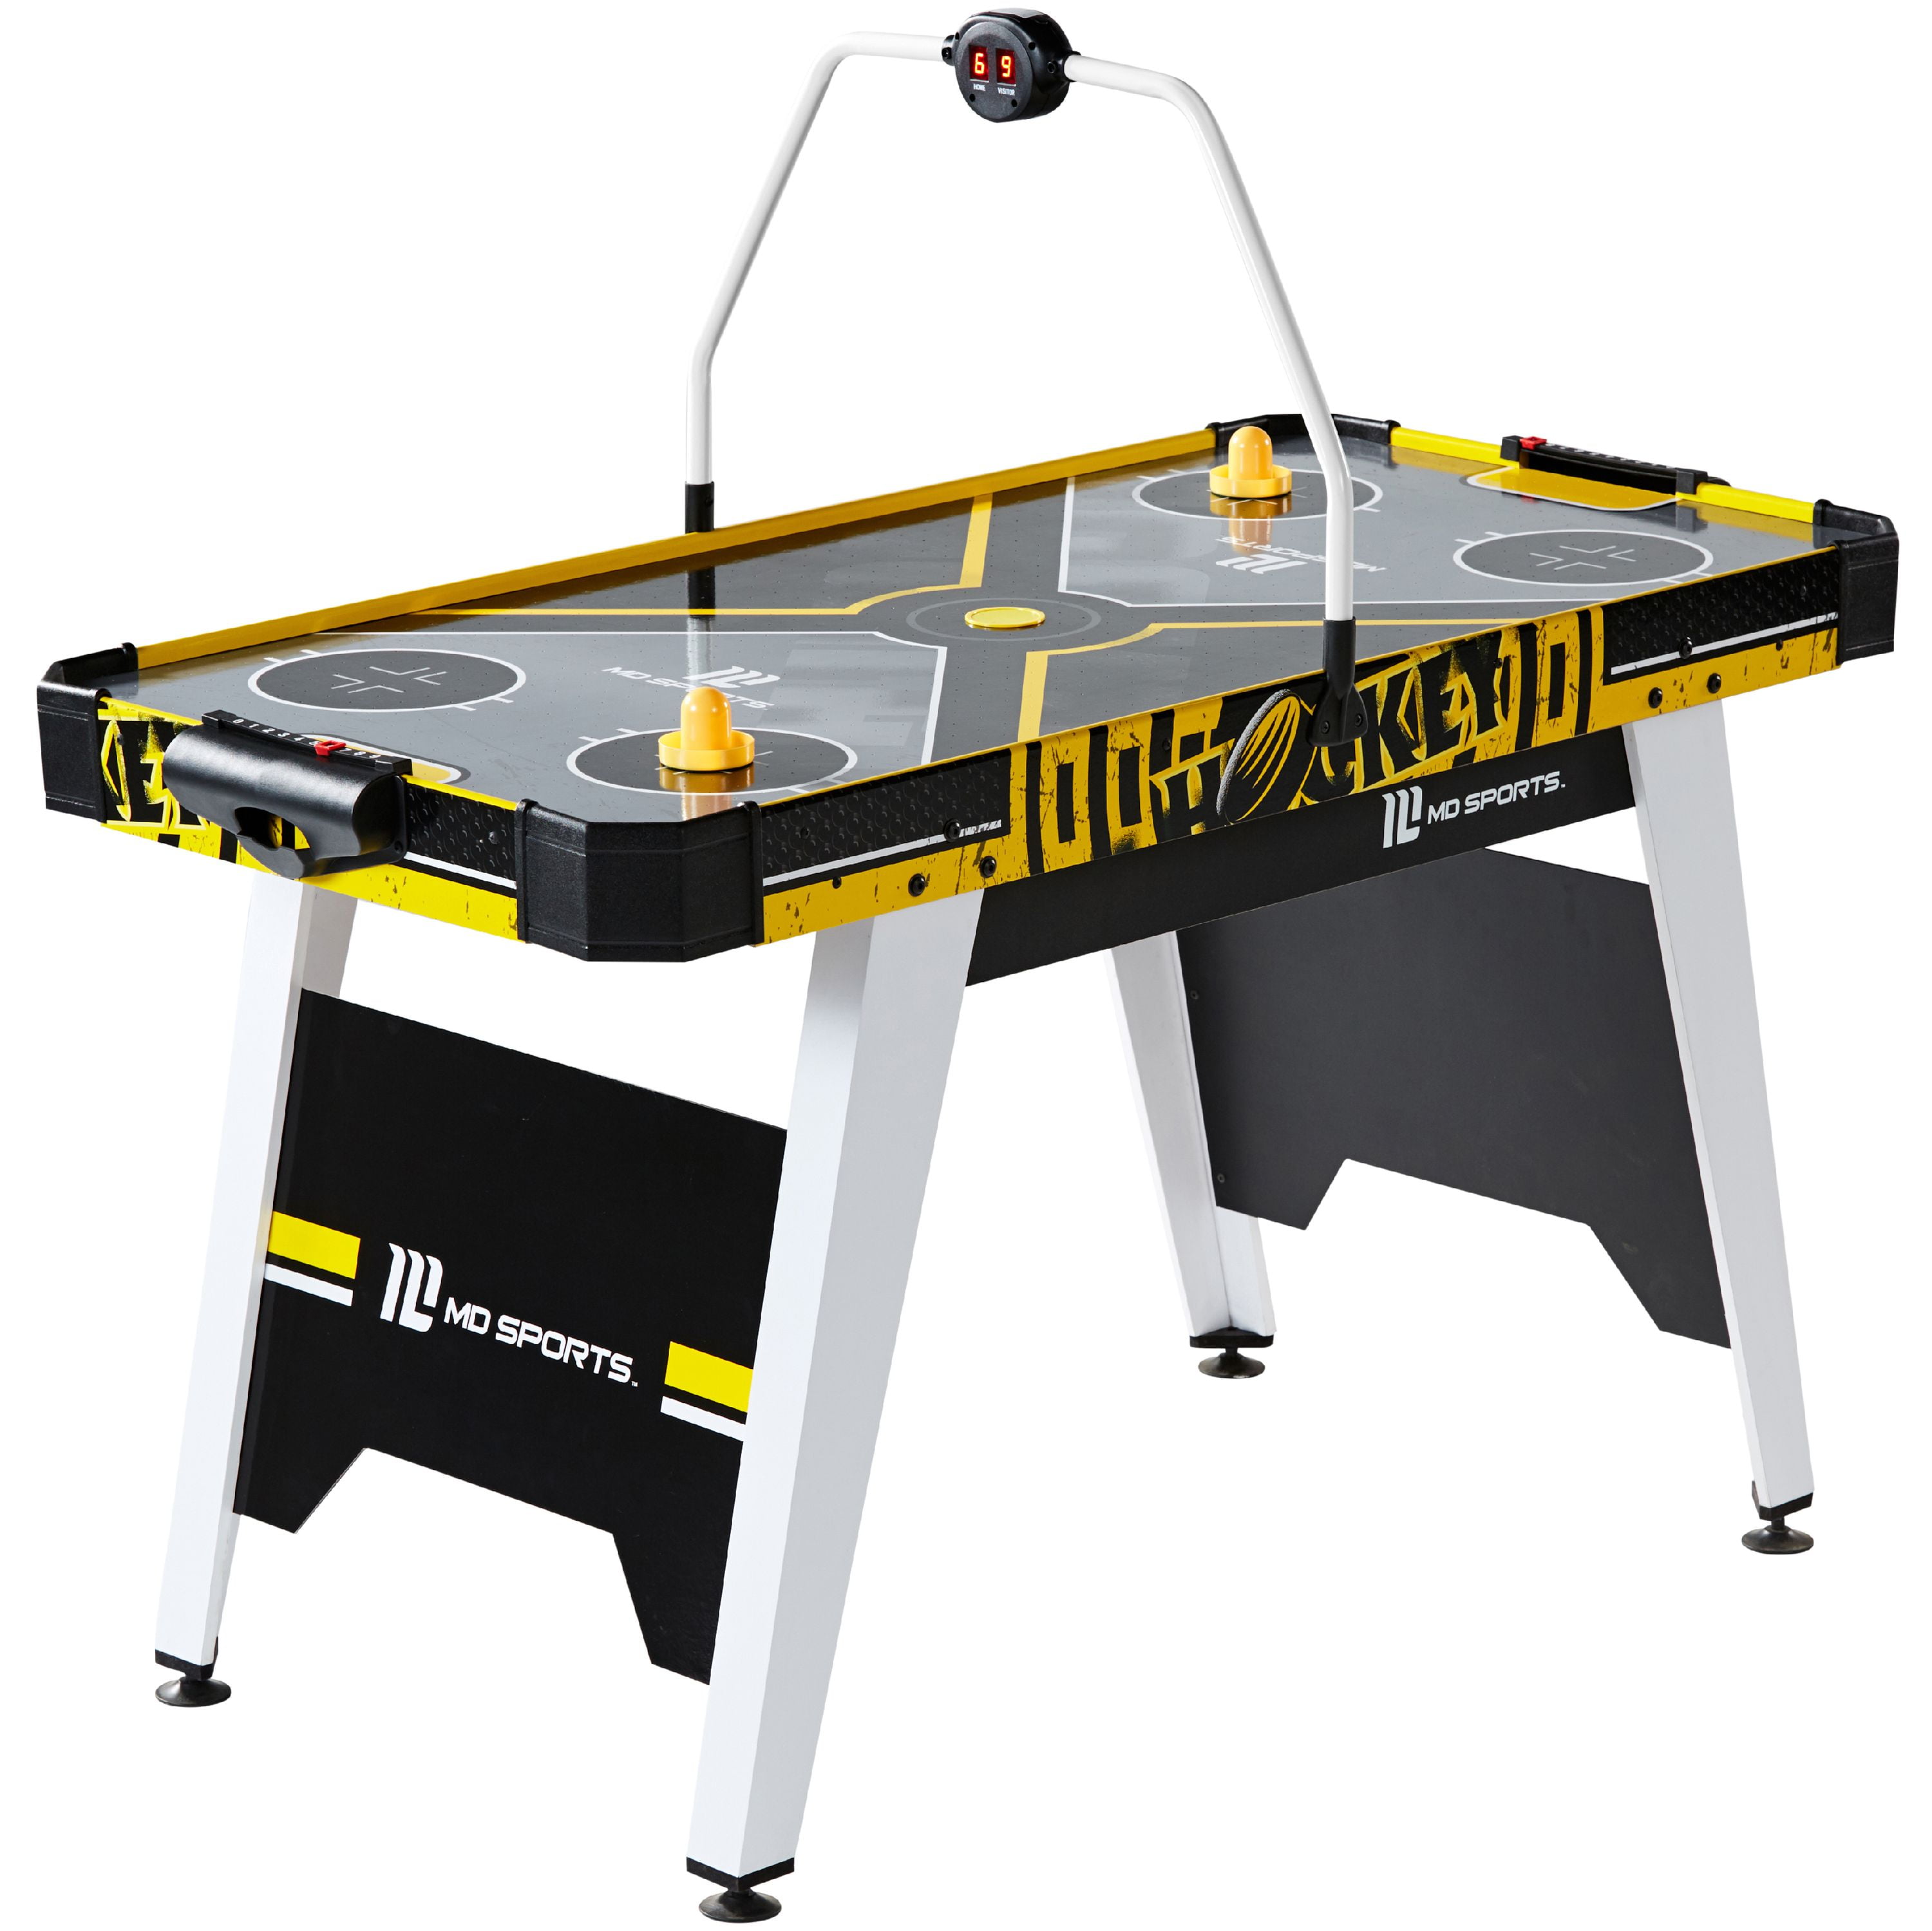 MD Sports Air Hockey Game Table, Overhead Electronic Scorer, Black/Yellow, 54/